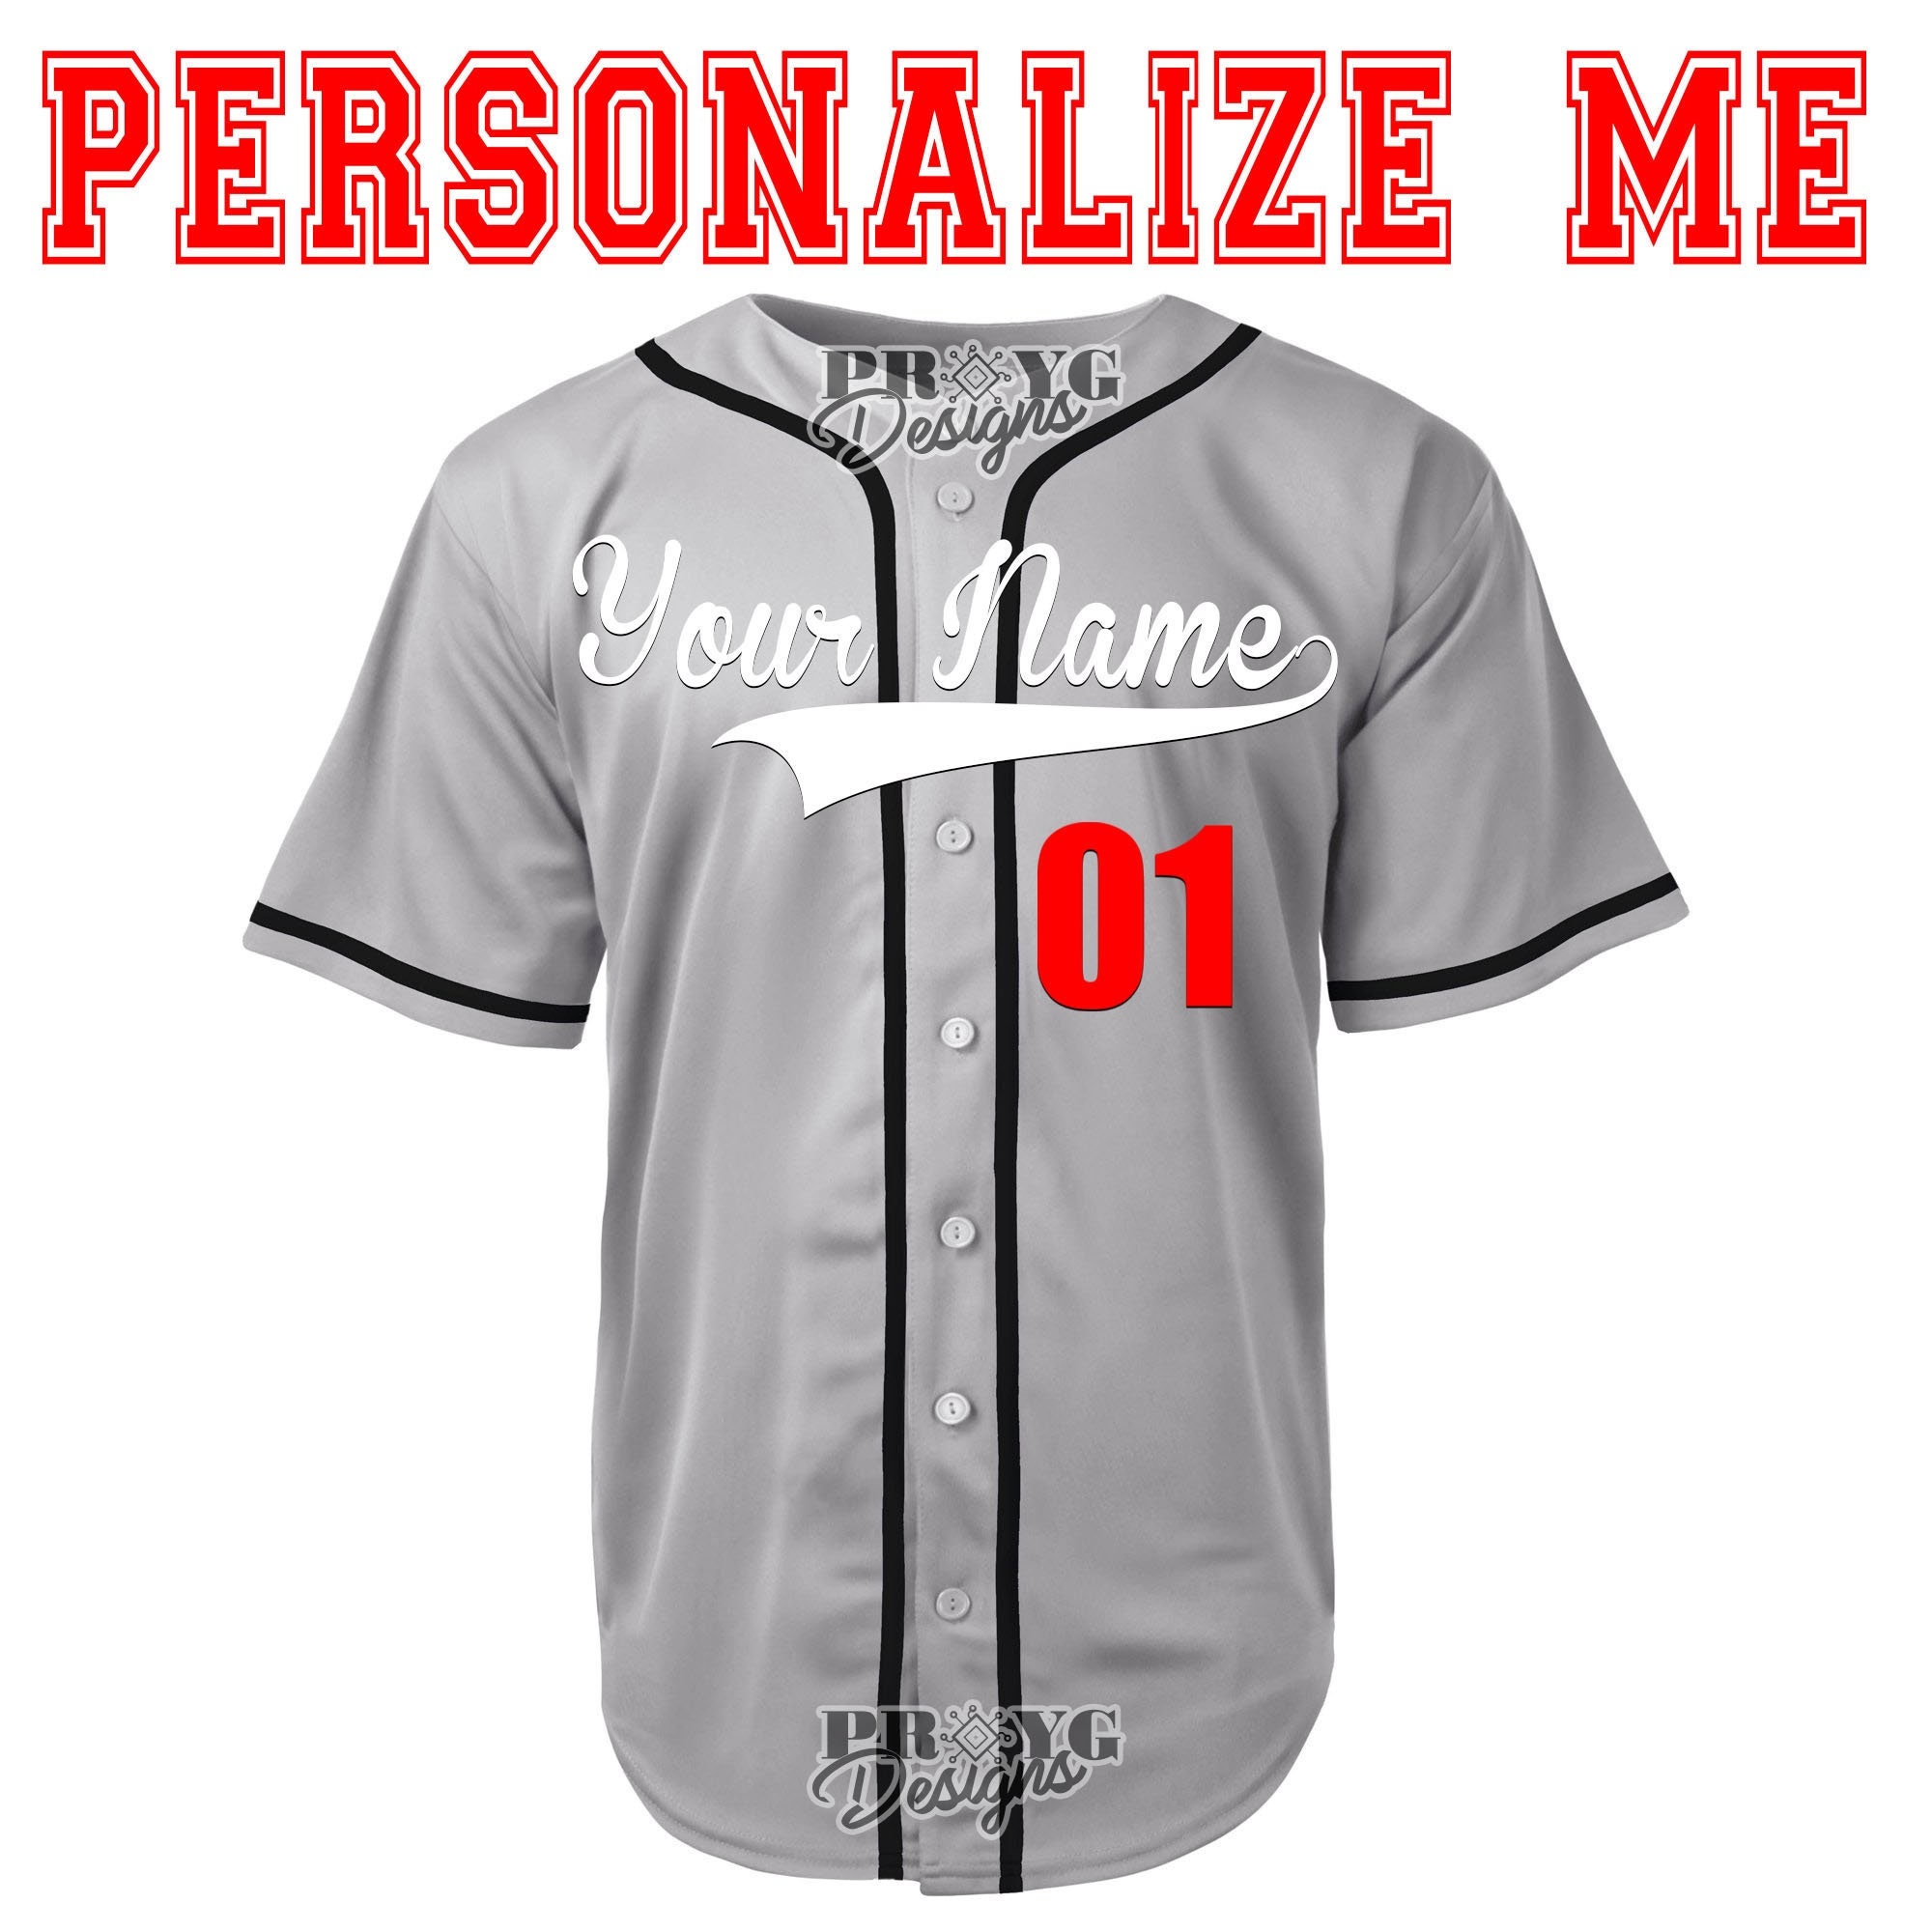 Youth & Adult Gray Button Front Baseball Jersey - Blank Jerseys